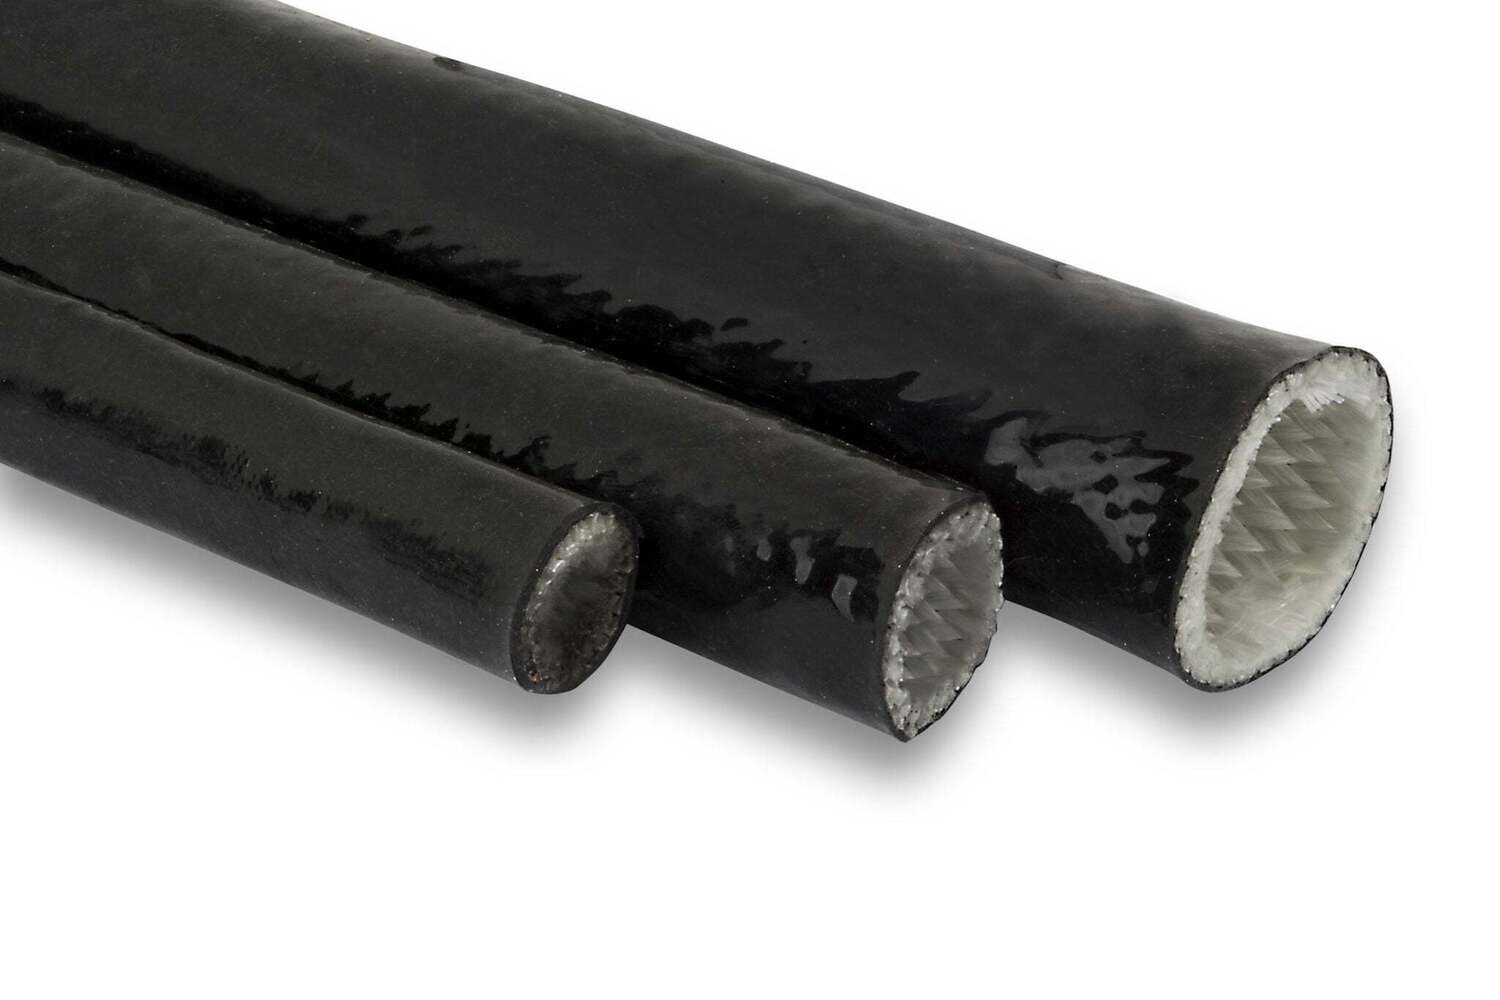 Black Silicon High Heat Sleeve - AN6 (Utilises 7mm Sleeving), 2.0m Multiple Qty will come on a continuous Roll